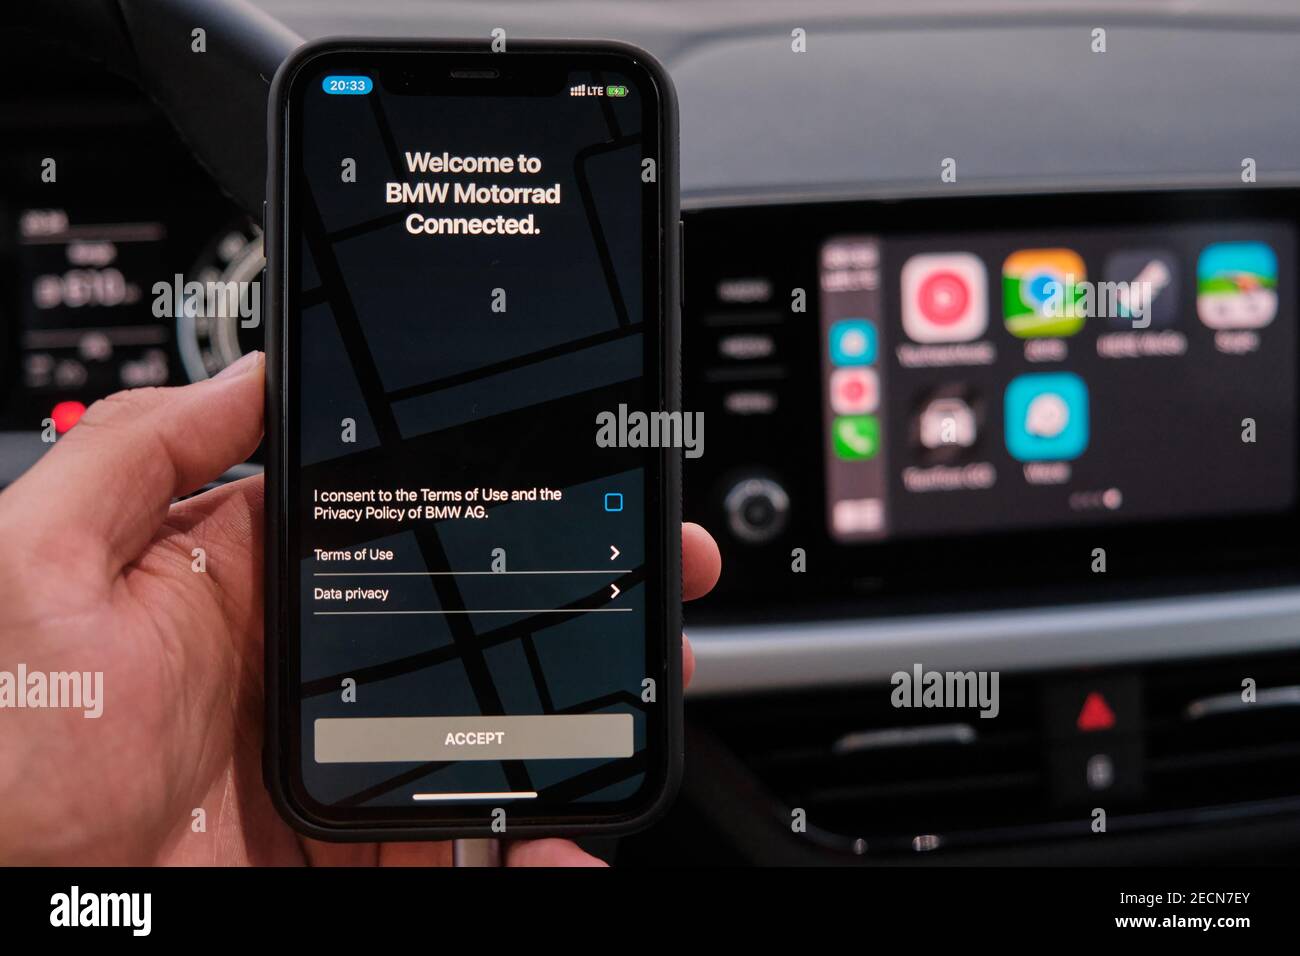 Welcome to BMW Motorrad connected on the screen of smart phone in mans hand  on the background of car dashboard screen with application of navigation  Stock Photo - Alamy